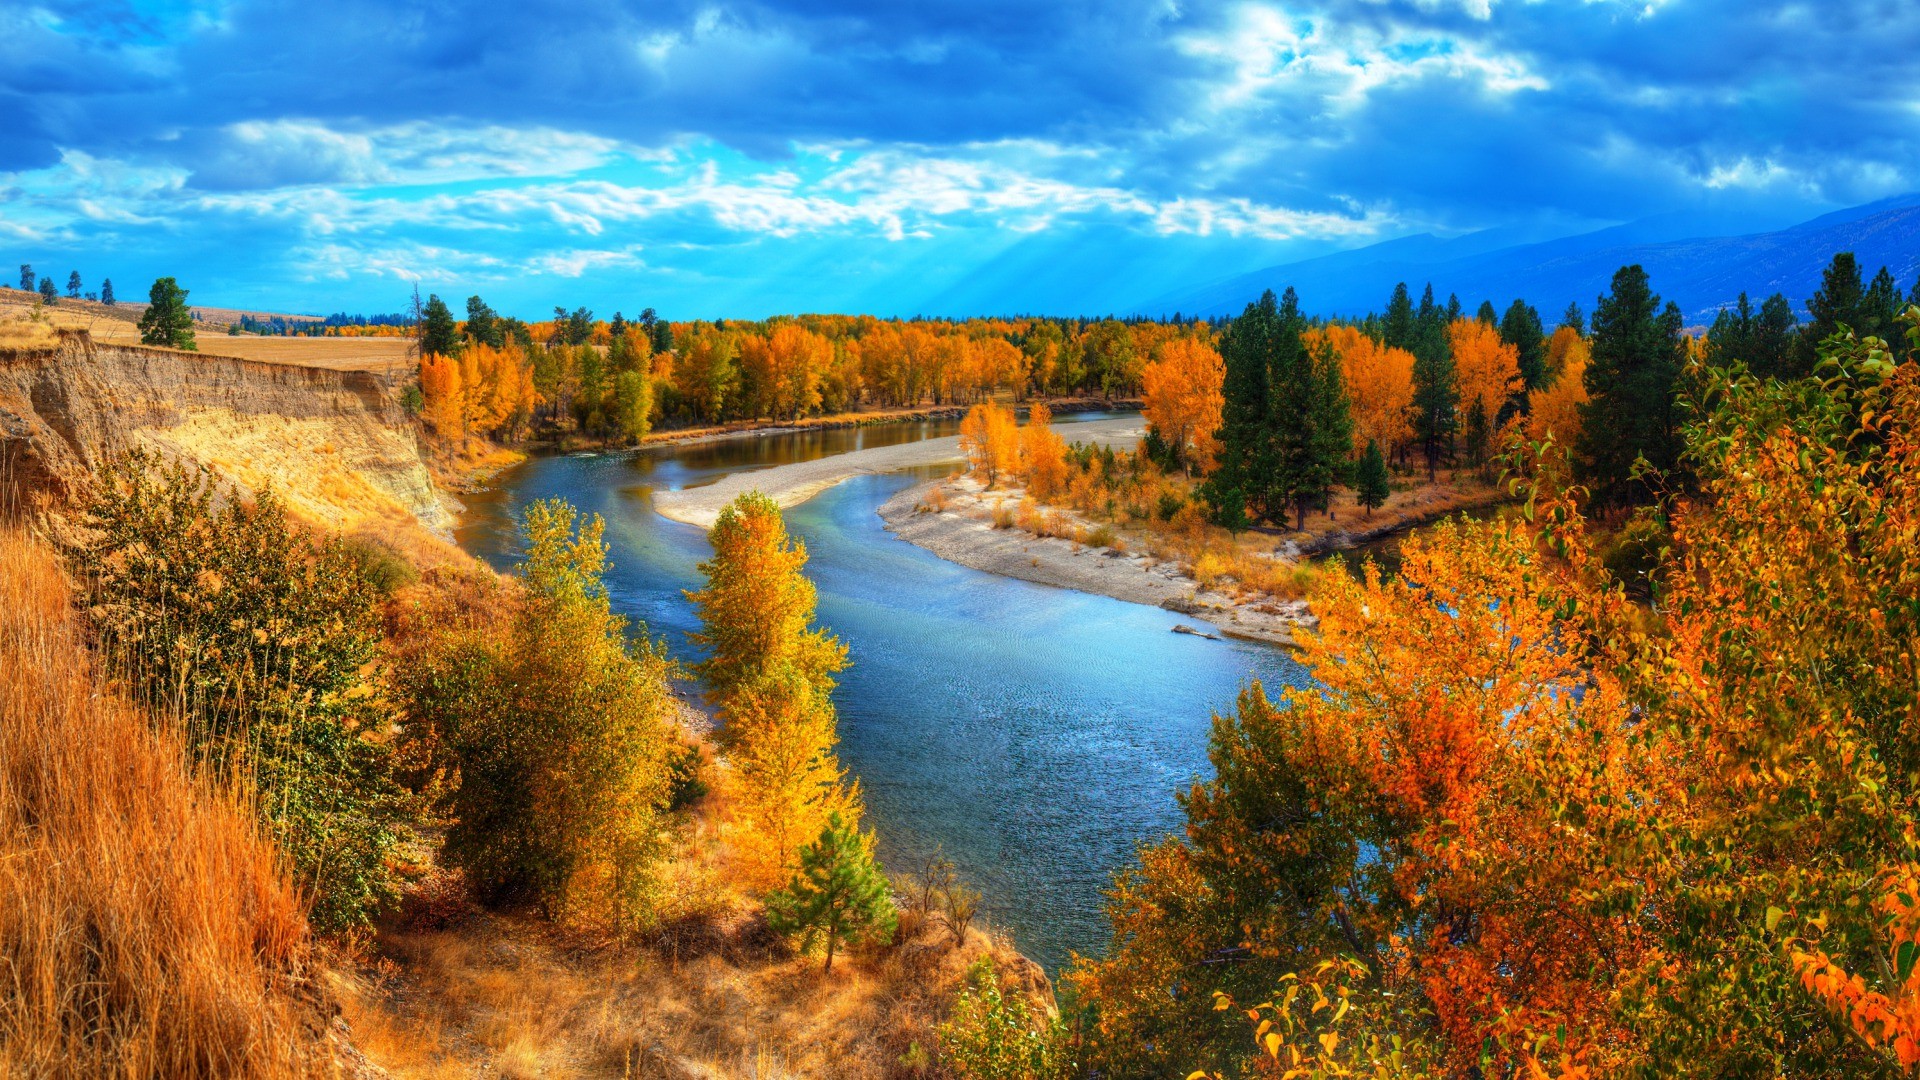 General 1920x1080 nature landscape river fall sky clouds trees